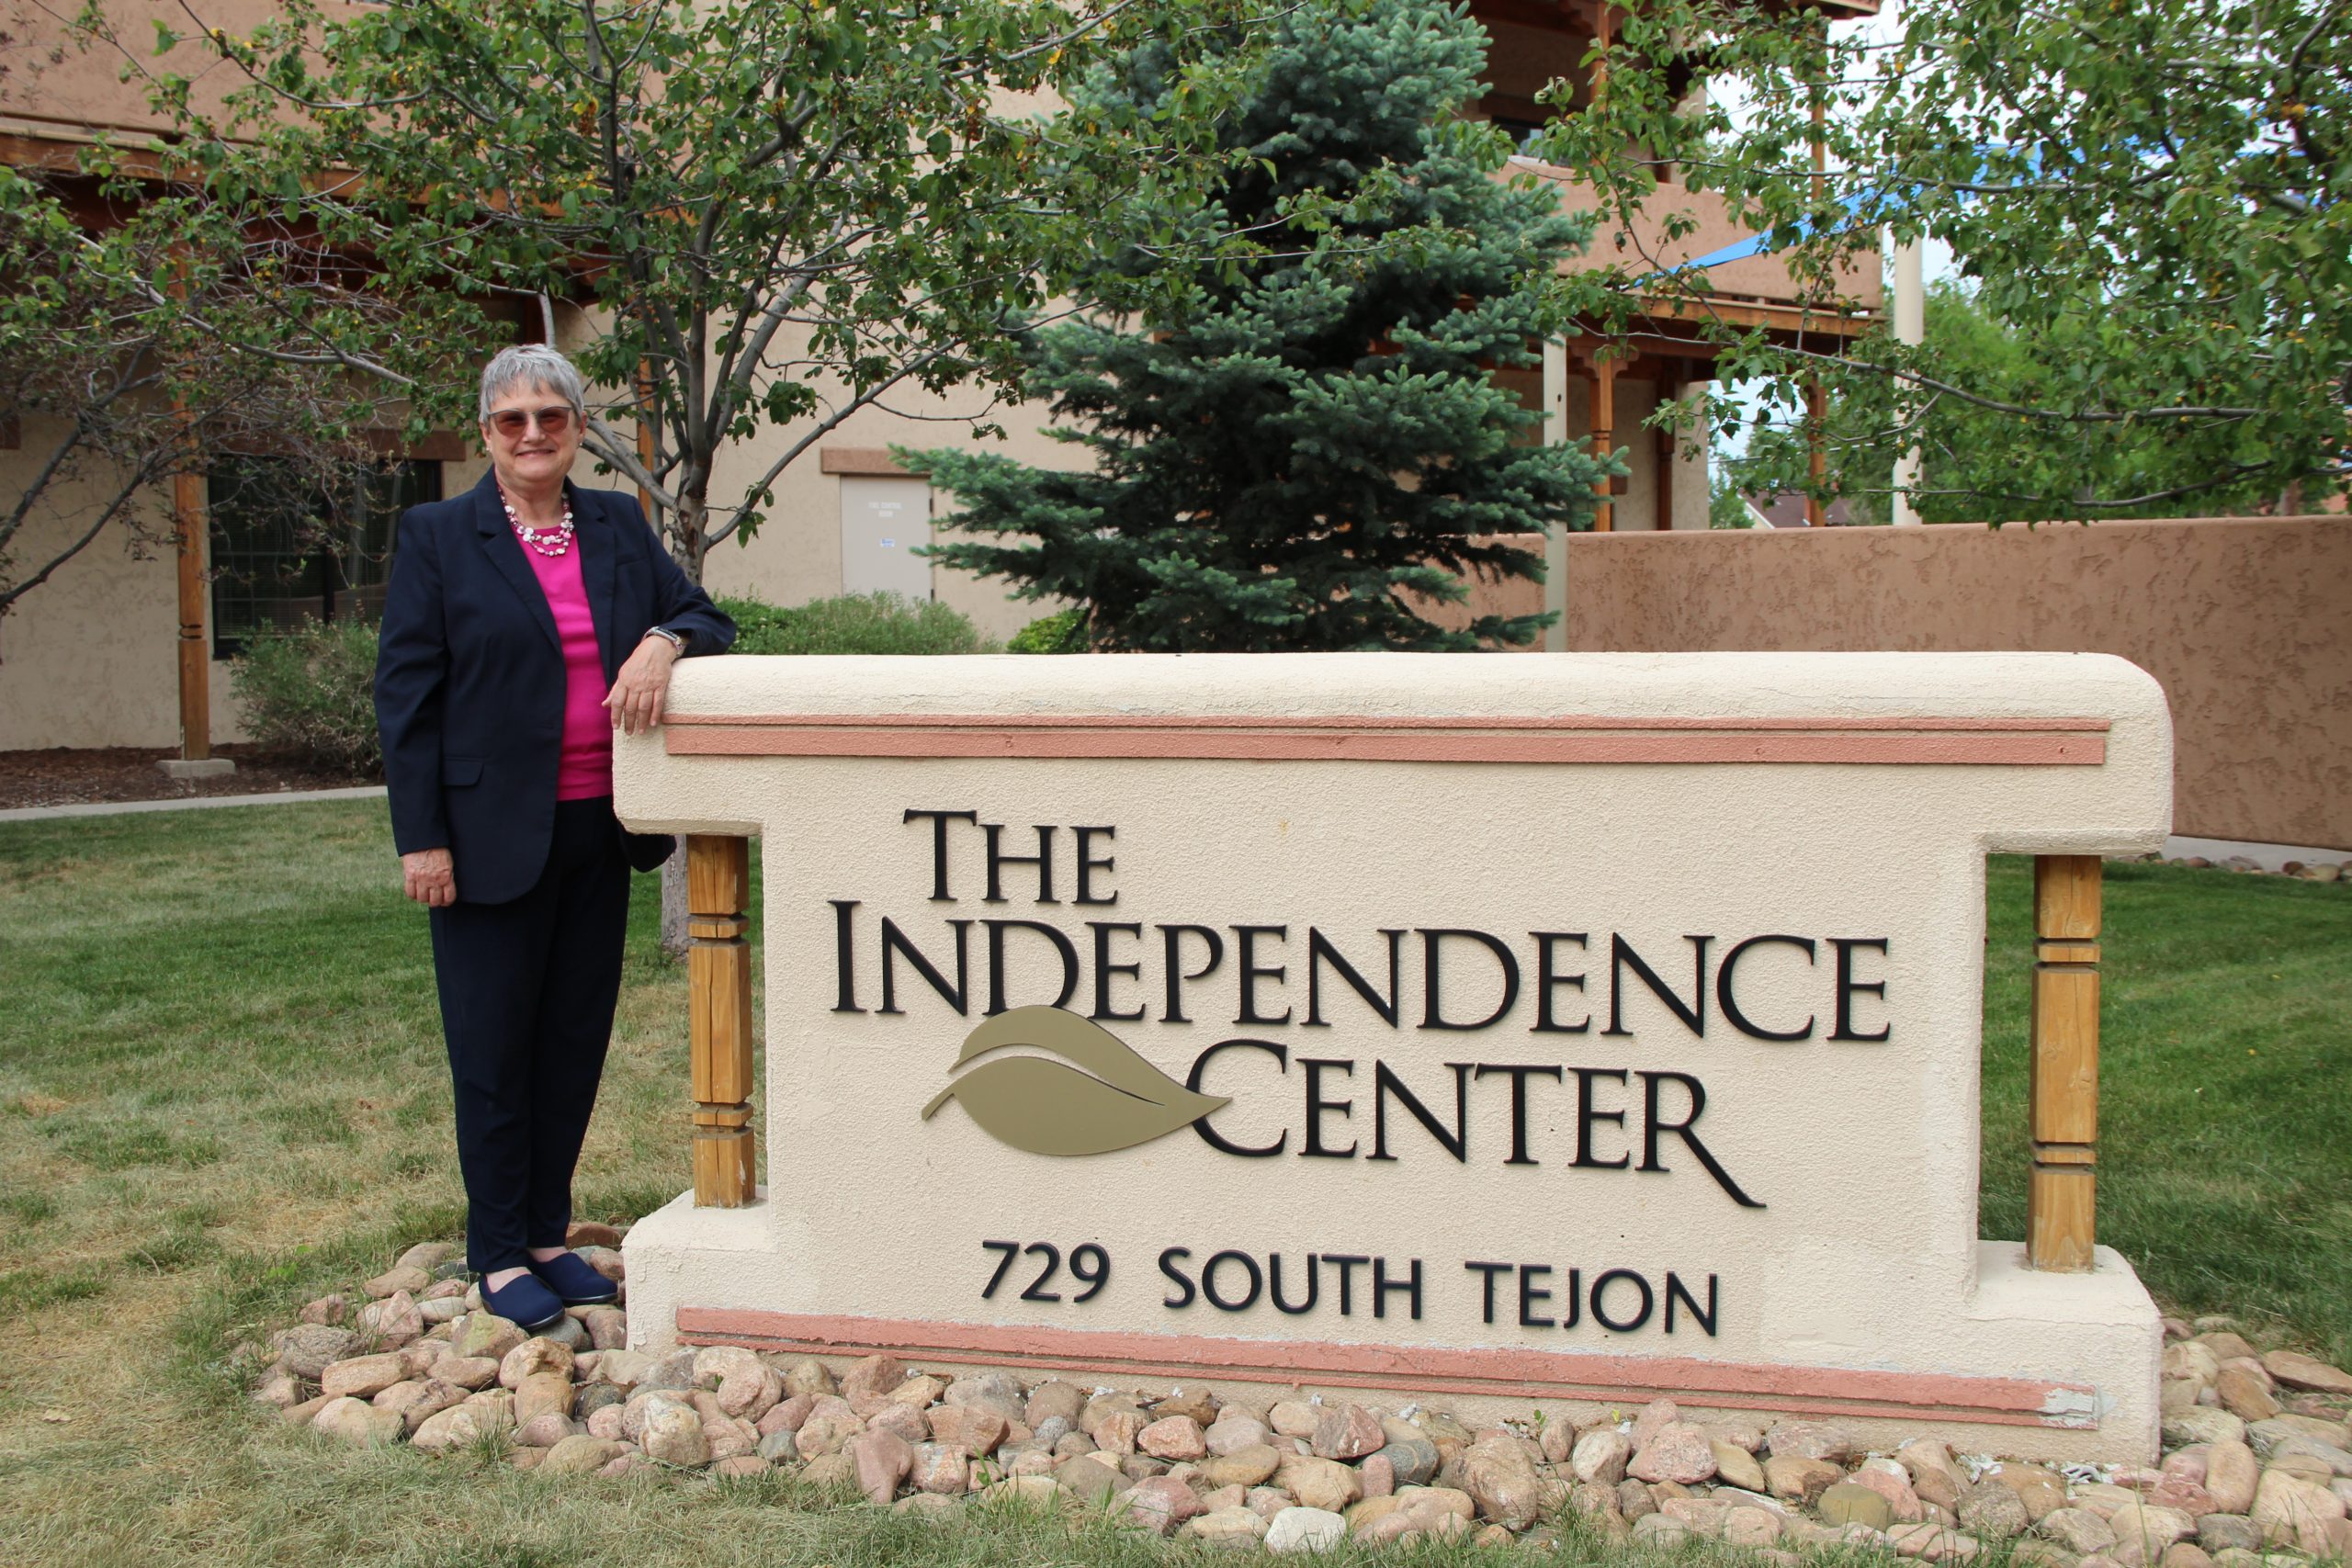 Patricia Yeager standing next to The Independence Center sign